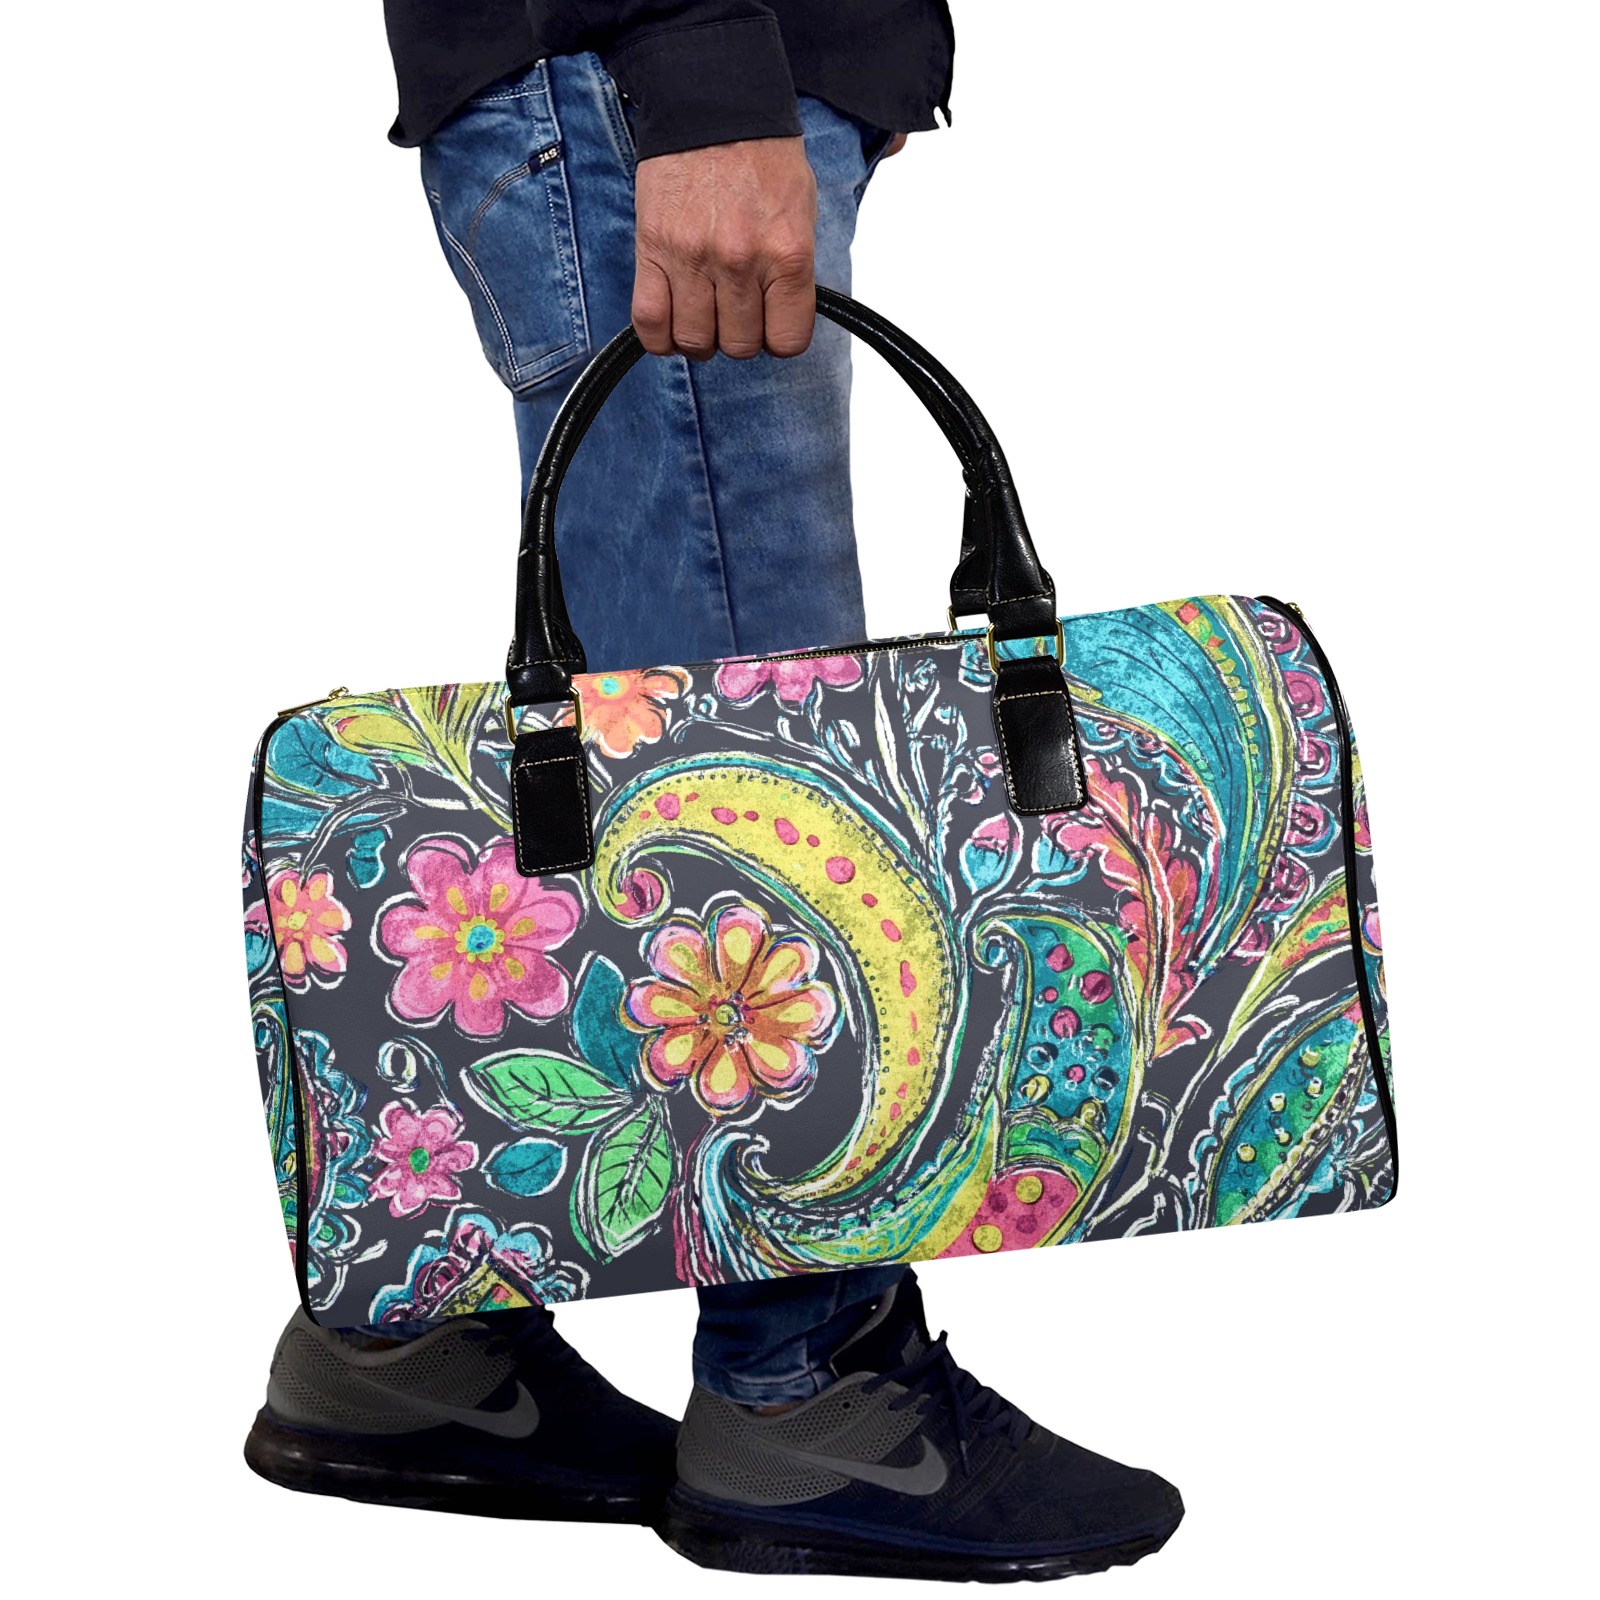 Paisley #1 Leather Travel Bag-Small (Short Patch) (1735)